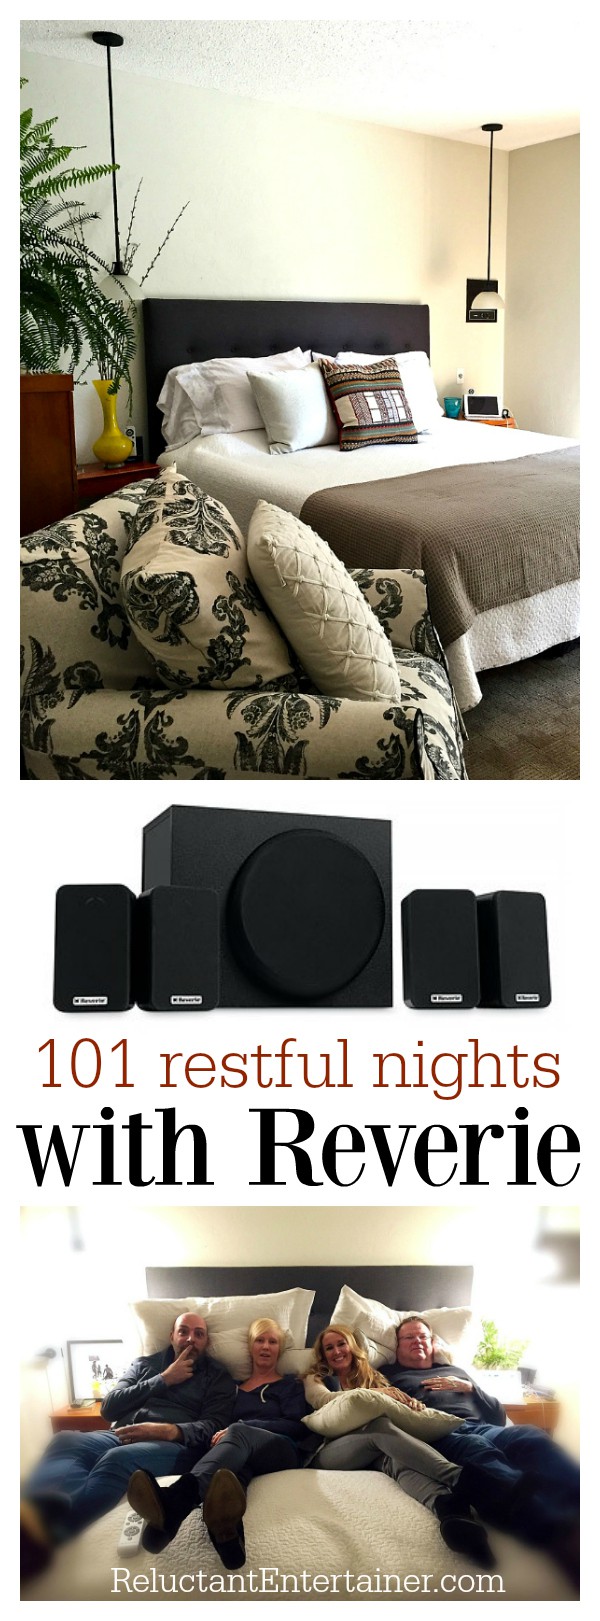 101 Restful Nights with Reverie